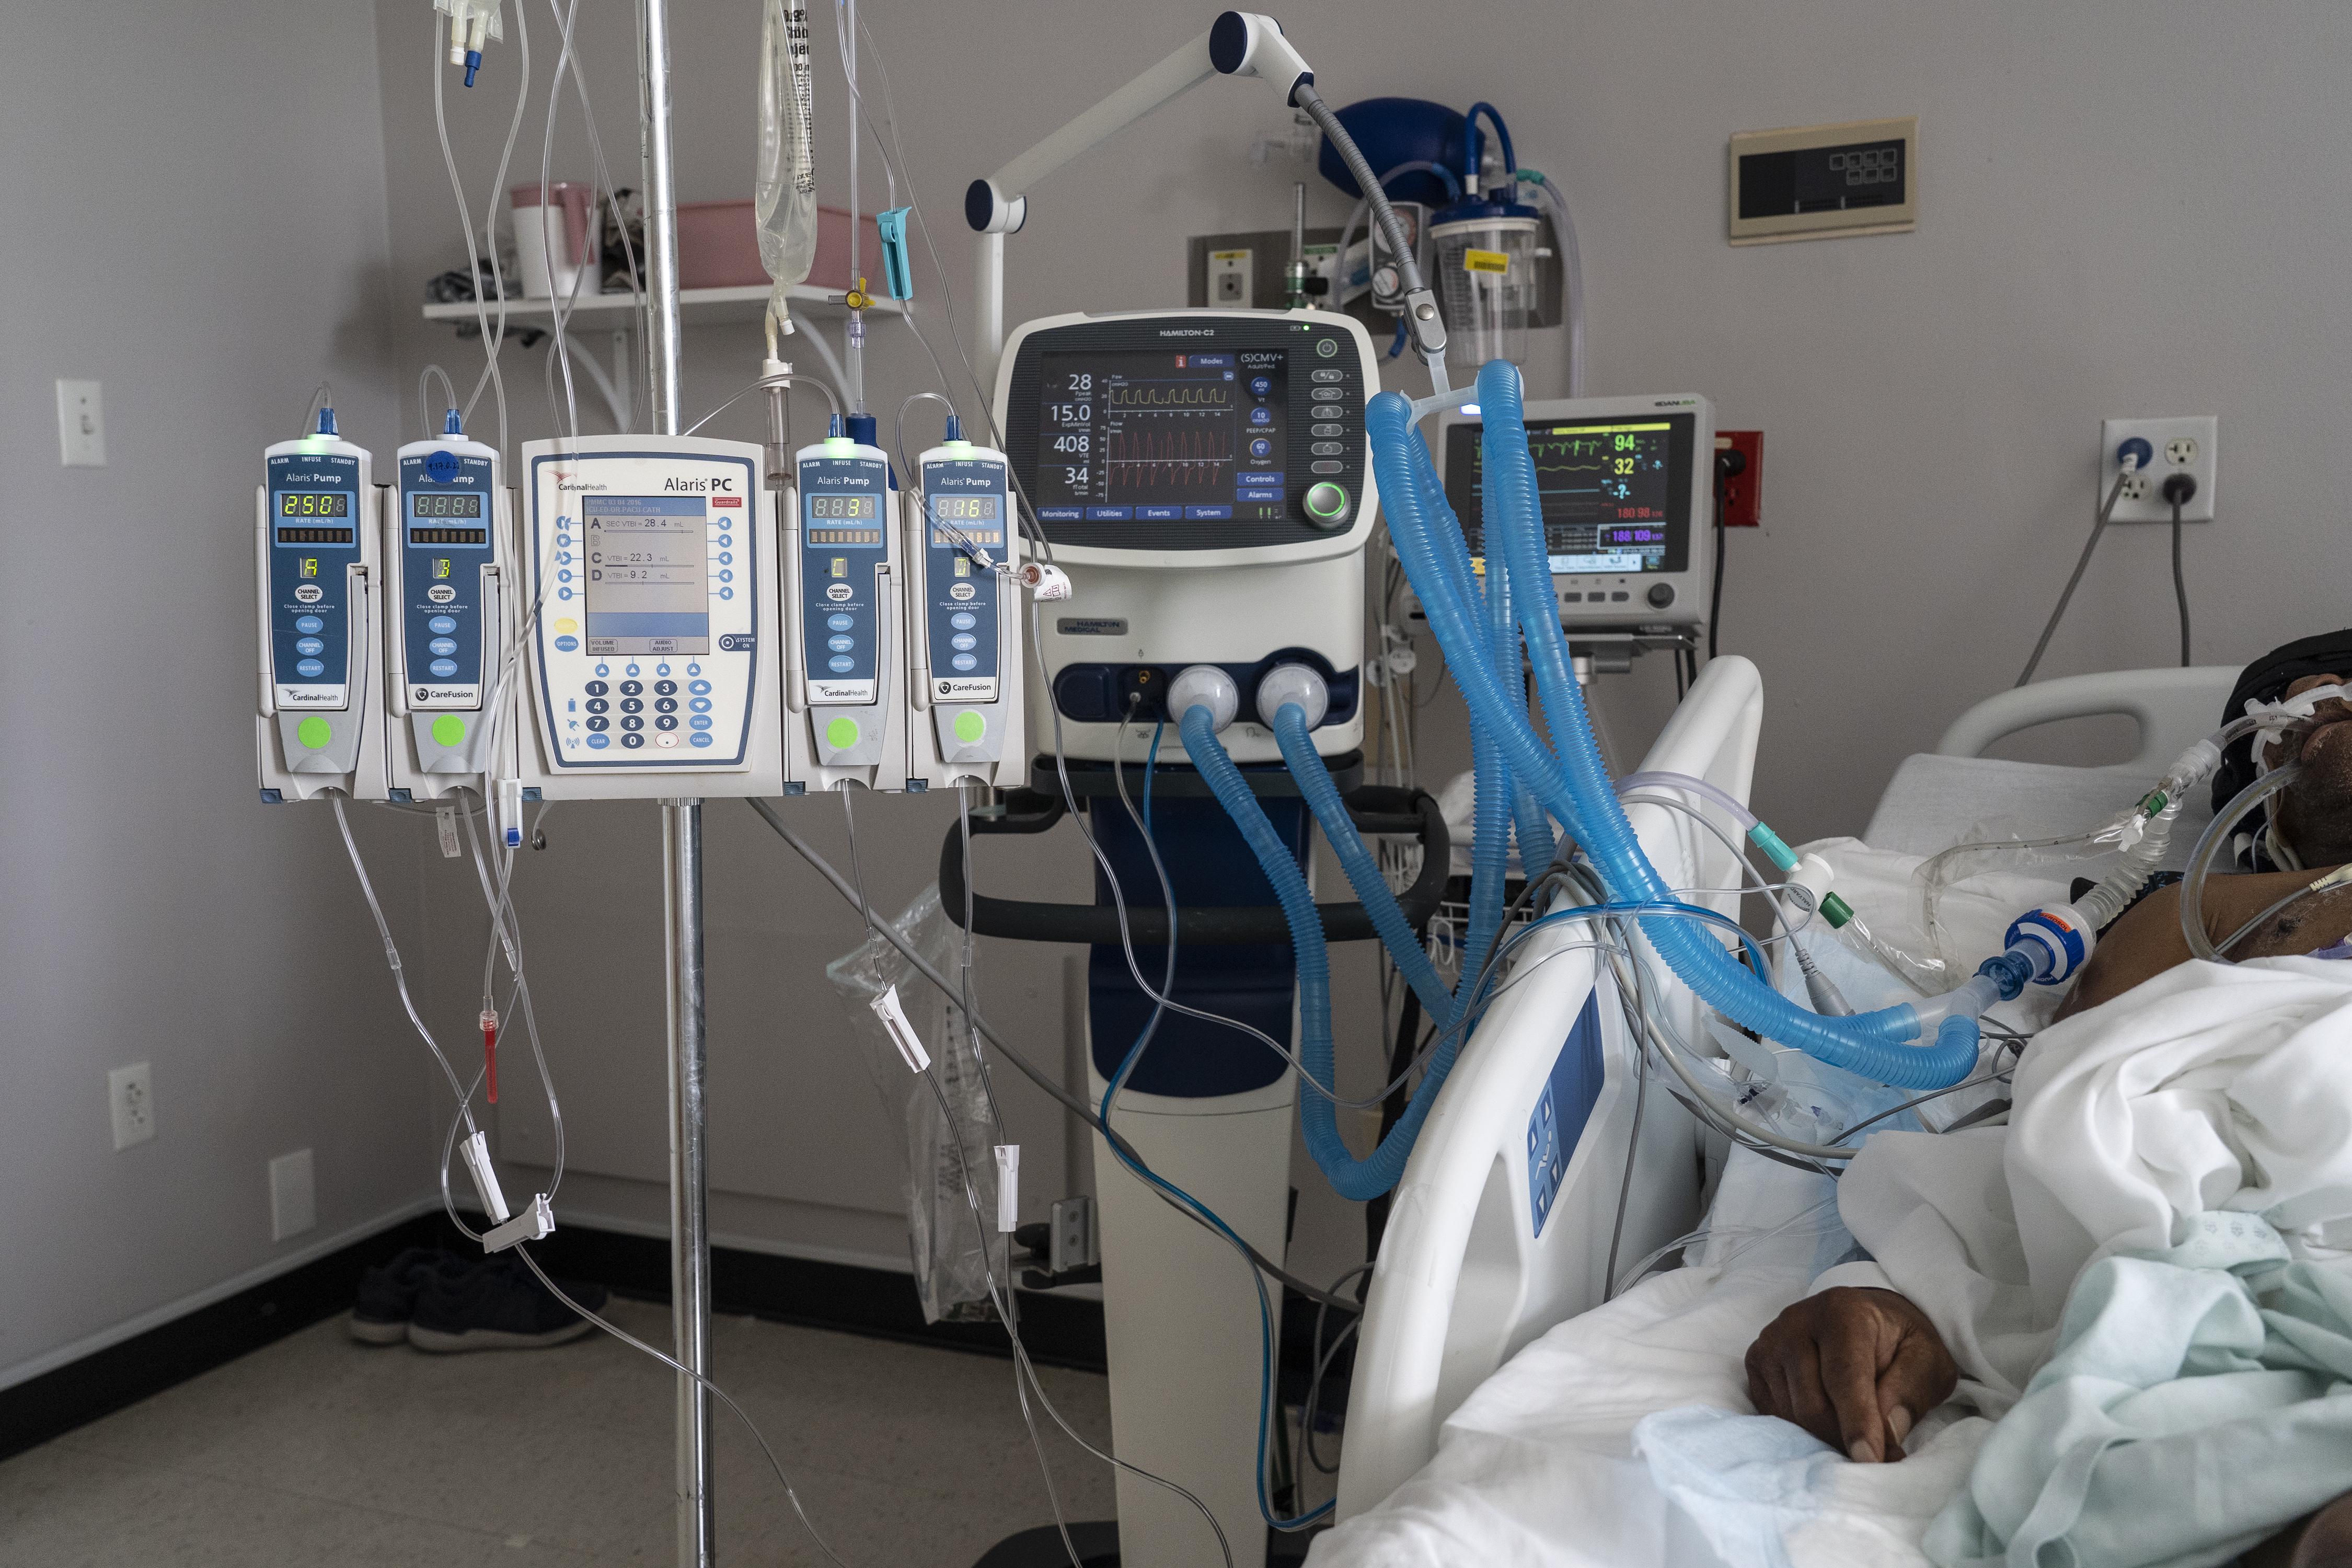 Hospital machinery and a ventilator stand to the left of a hospital bed. On the right, part of a patient's body is visible, connected to the machinery.